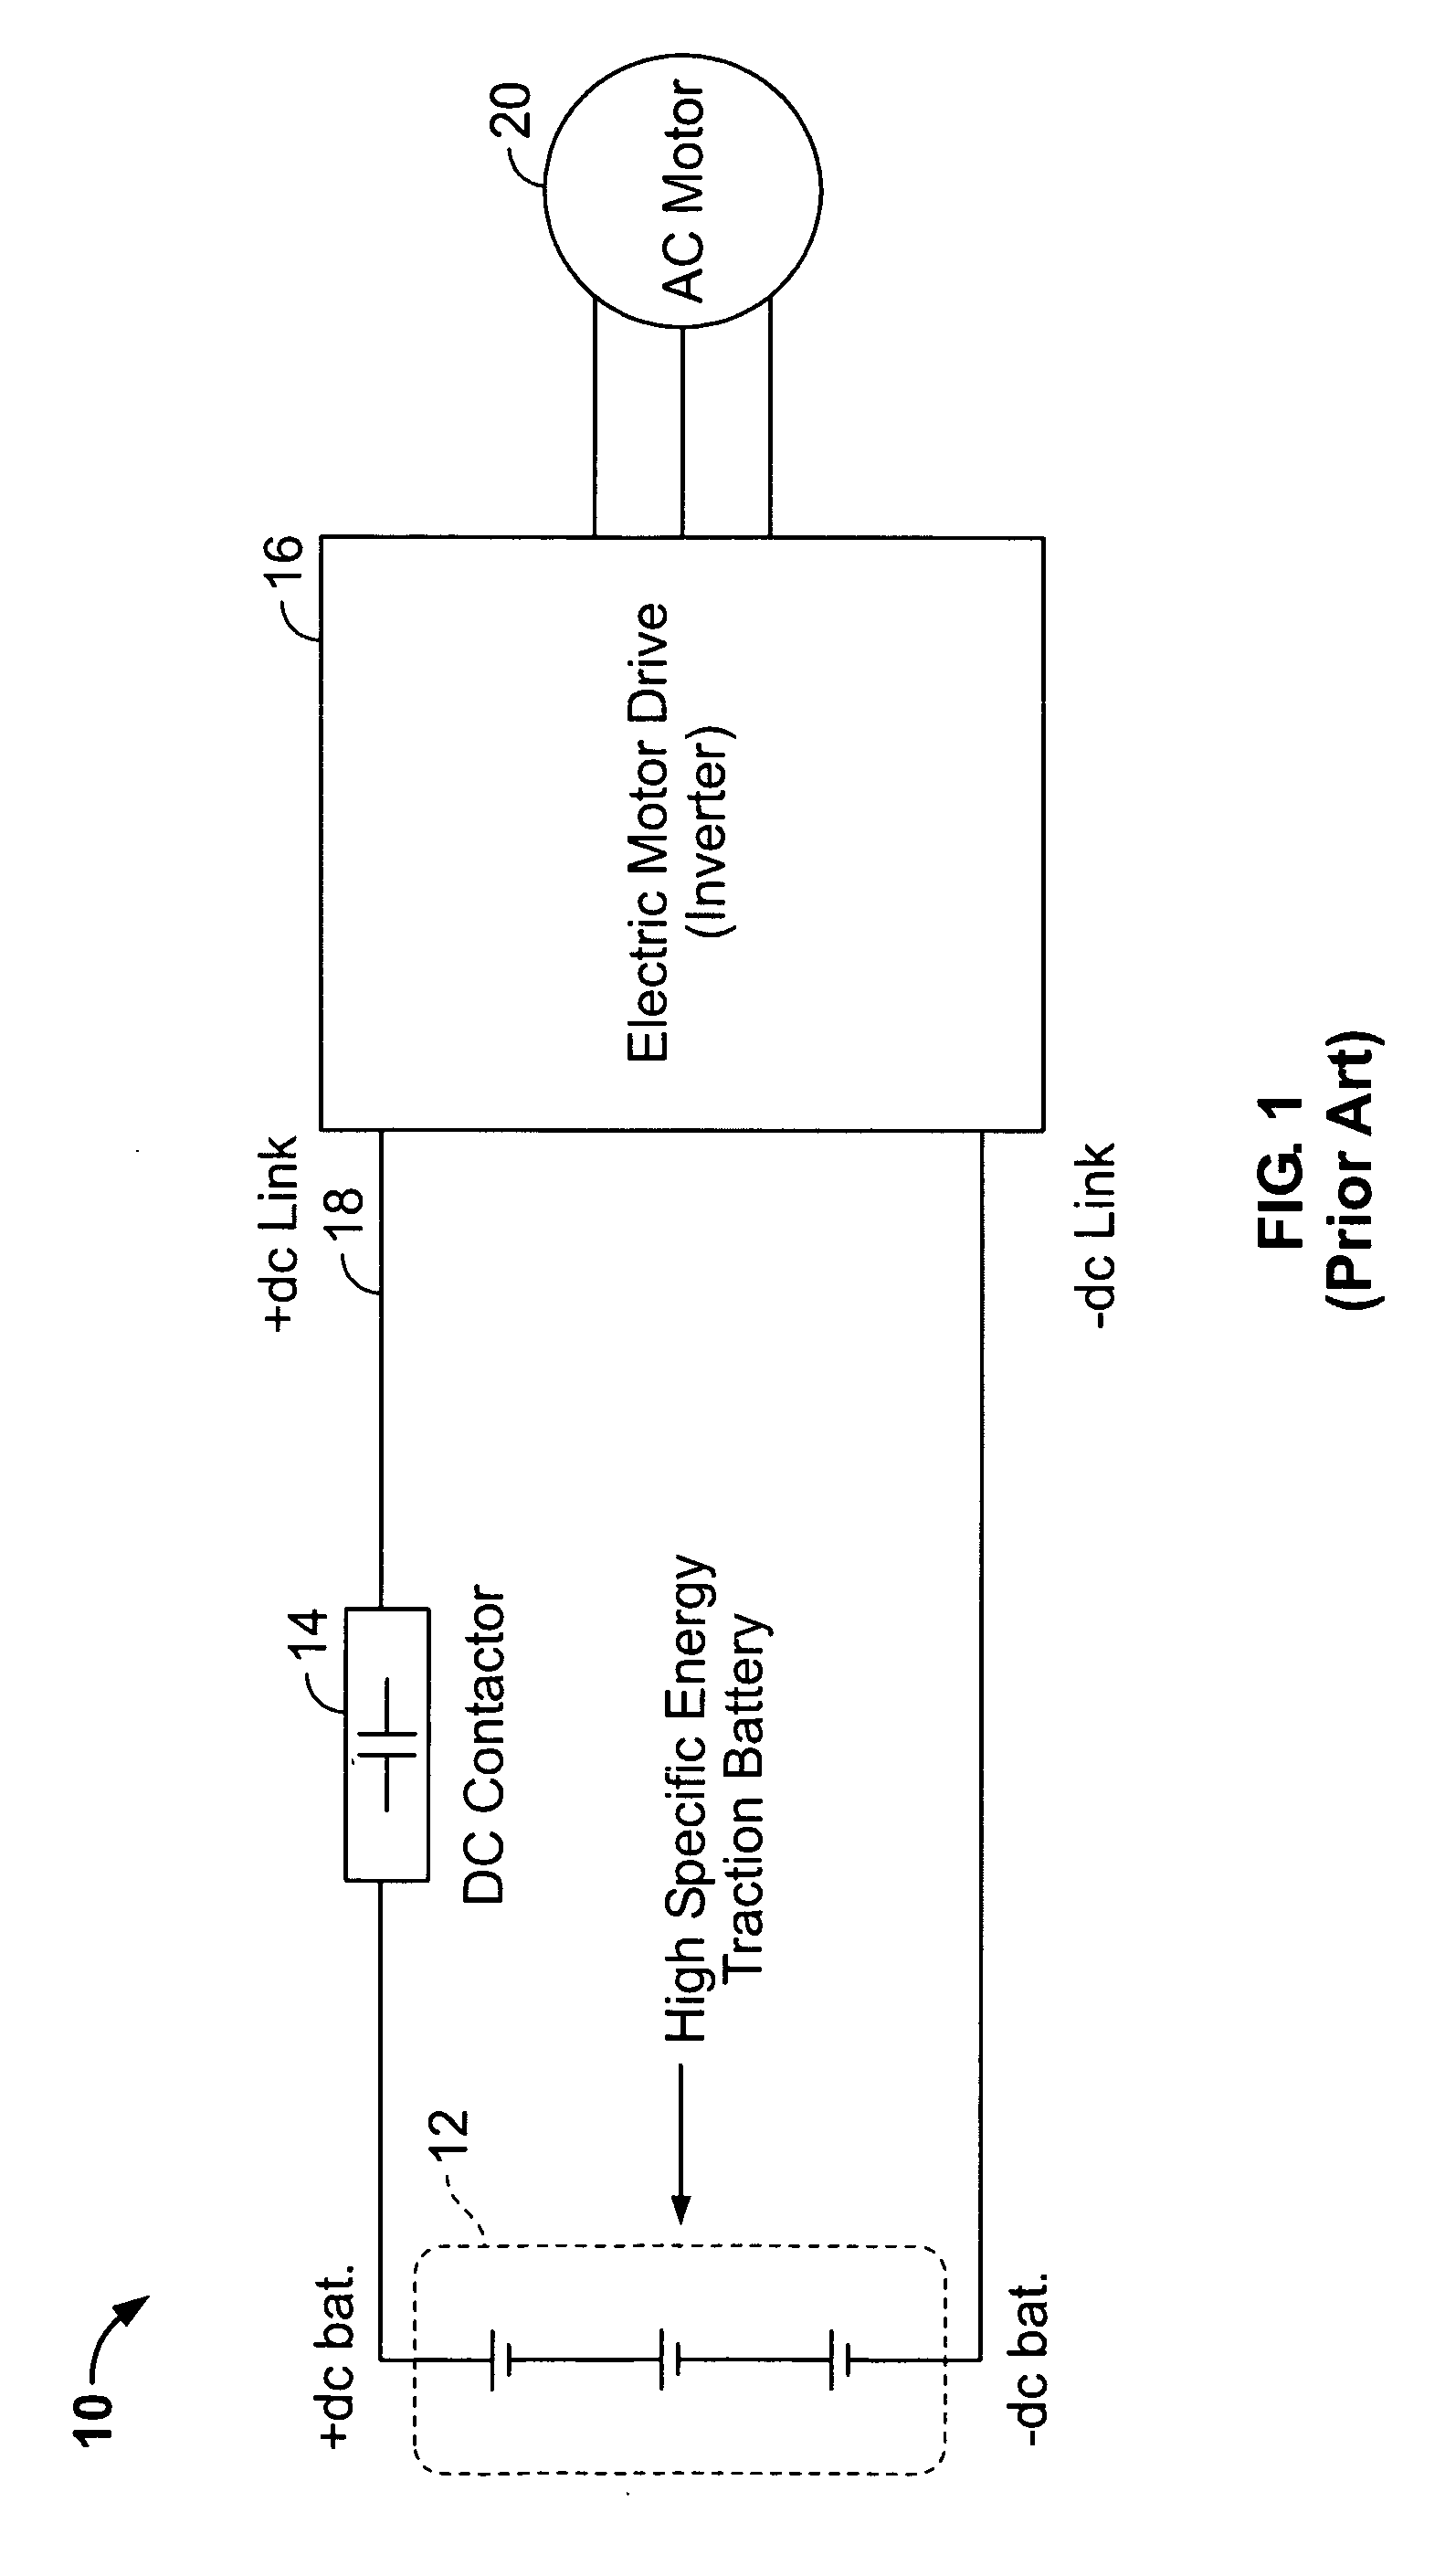 Energy storage system for electric or hybrid vehicle